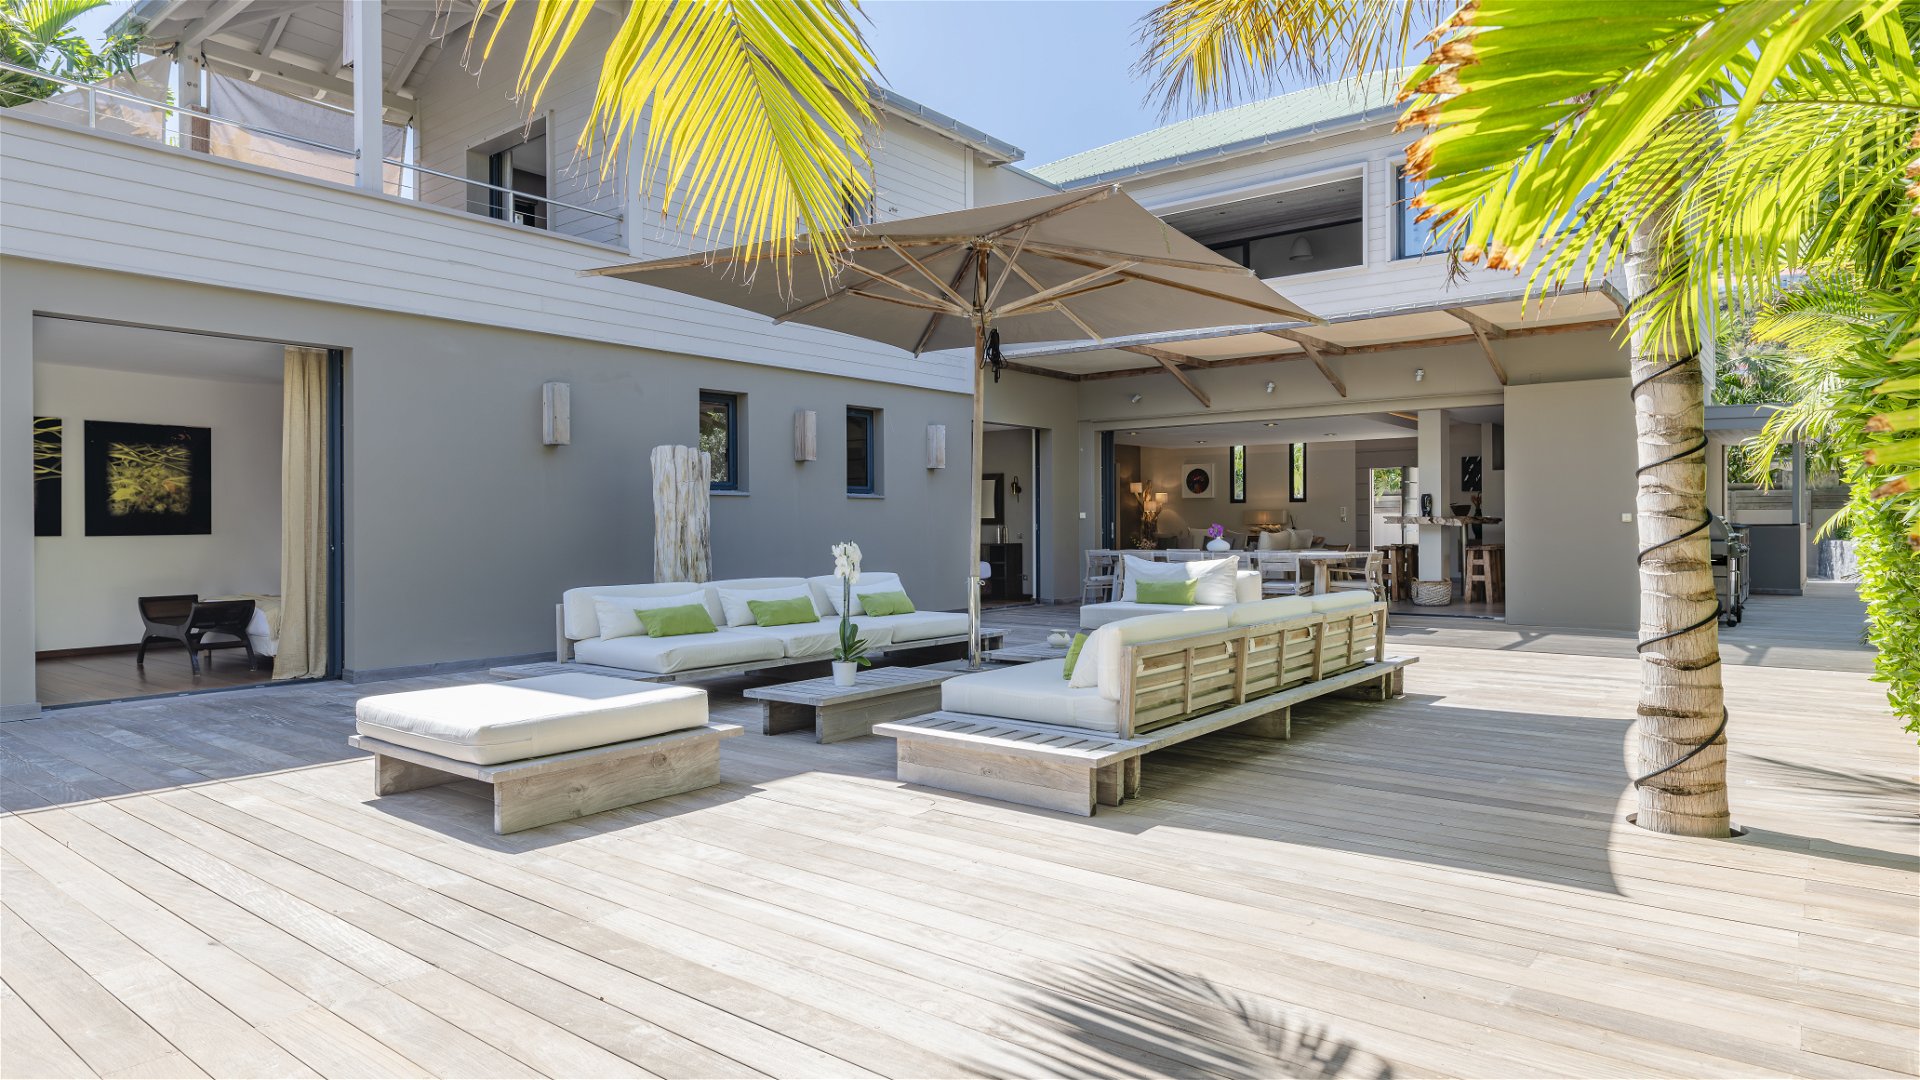 OUTDOOR LOUNGE AREA